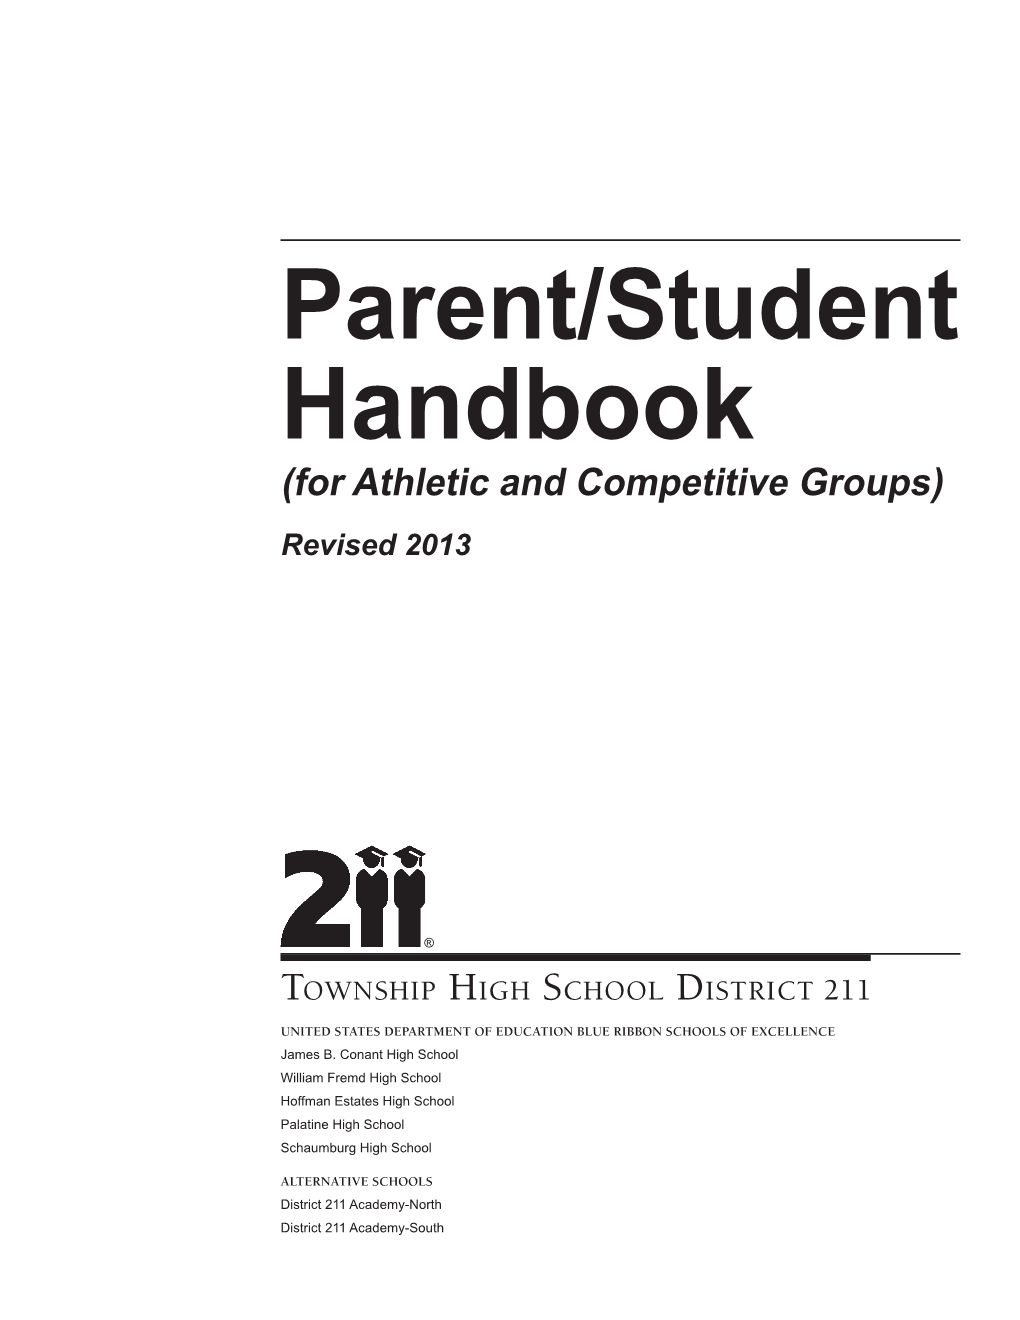 Parent/Student Handbook (For Athletic and Competitive Groups) Revised 2013